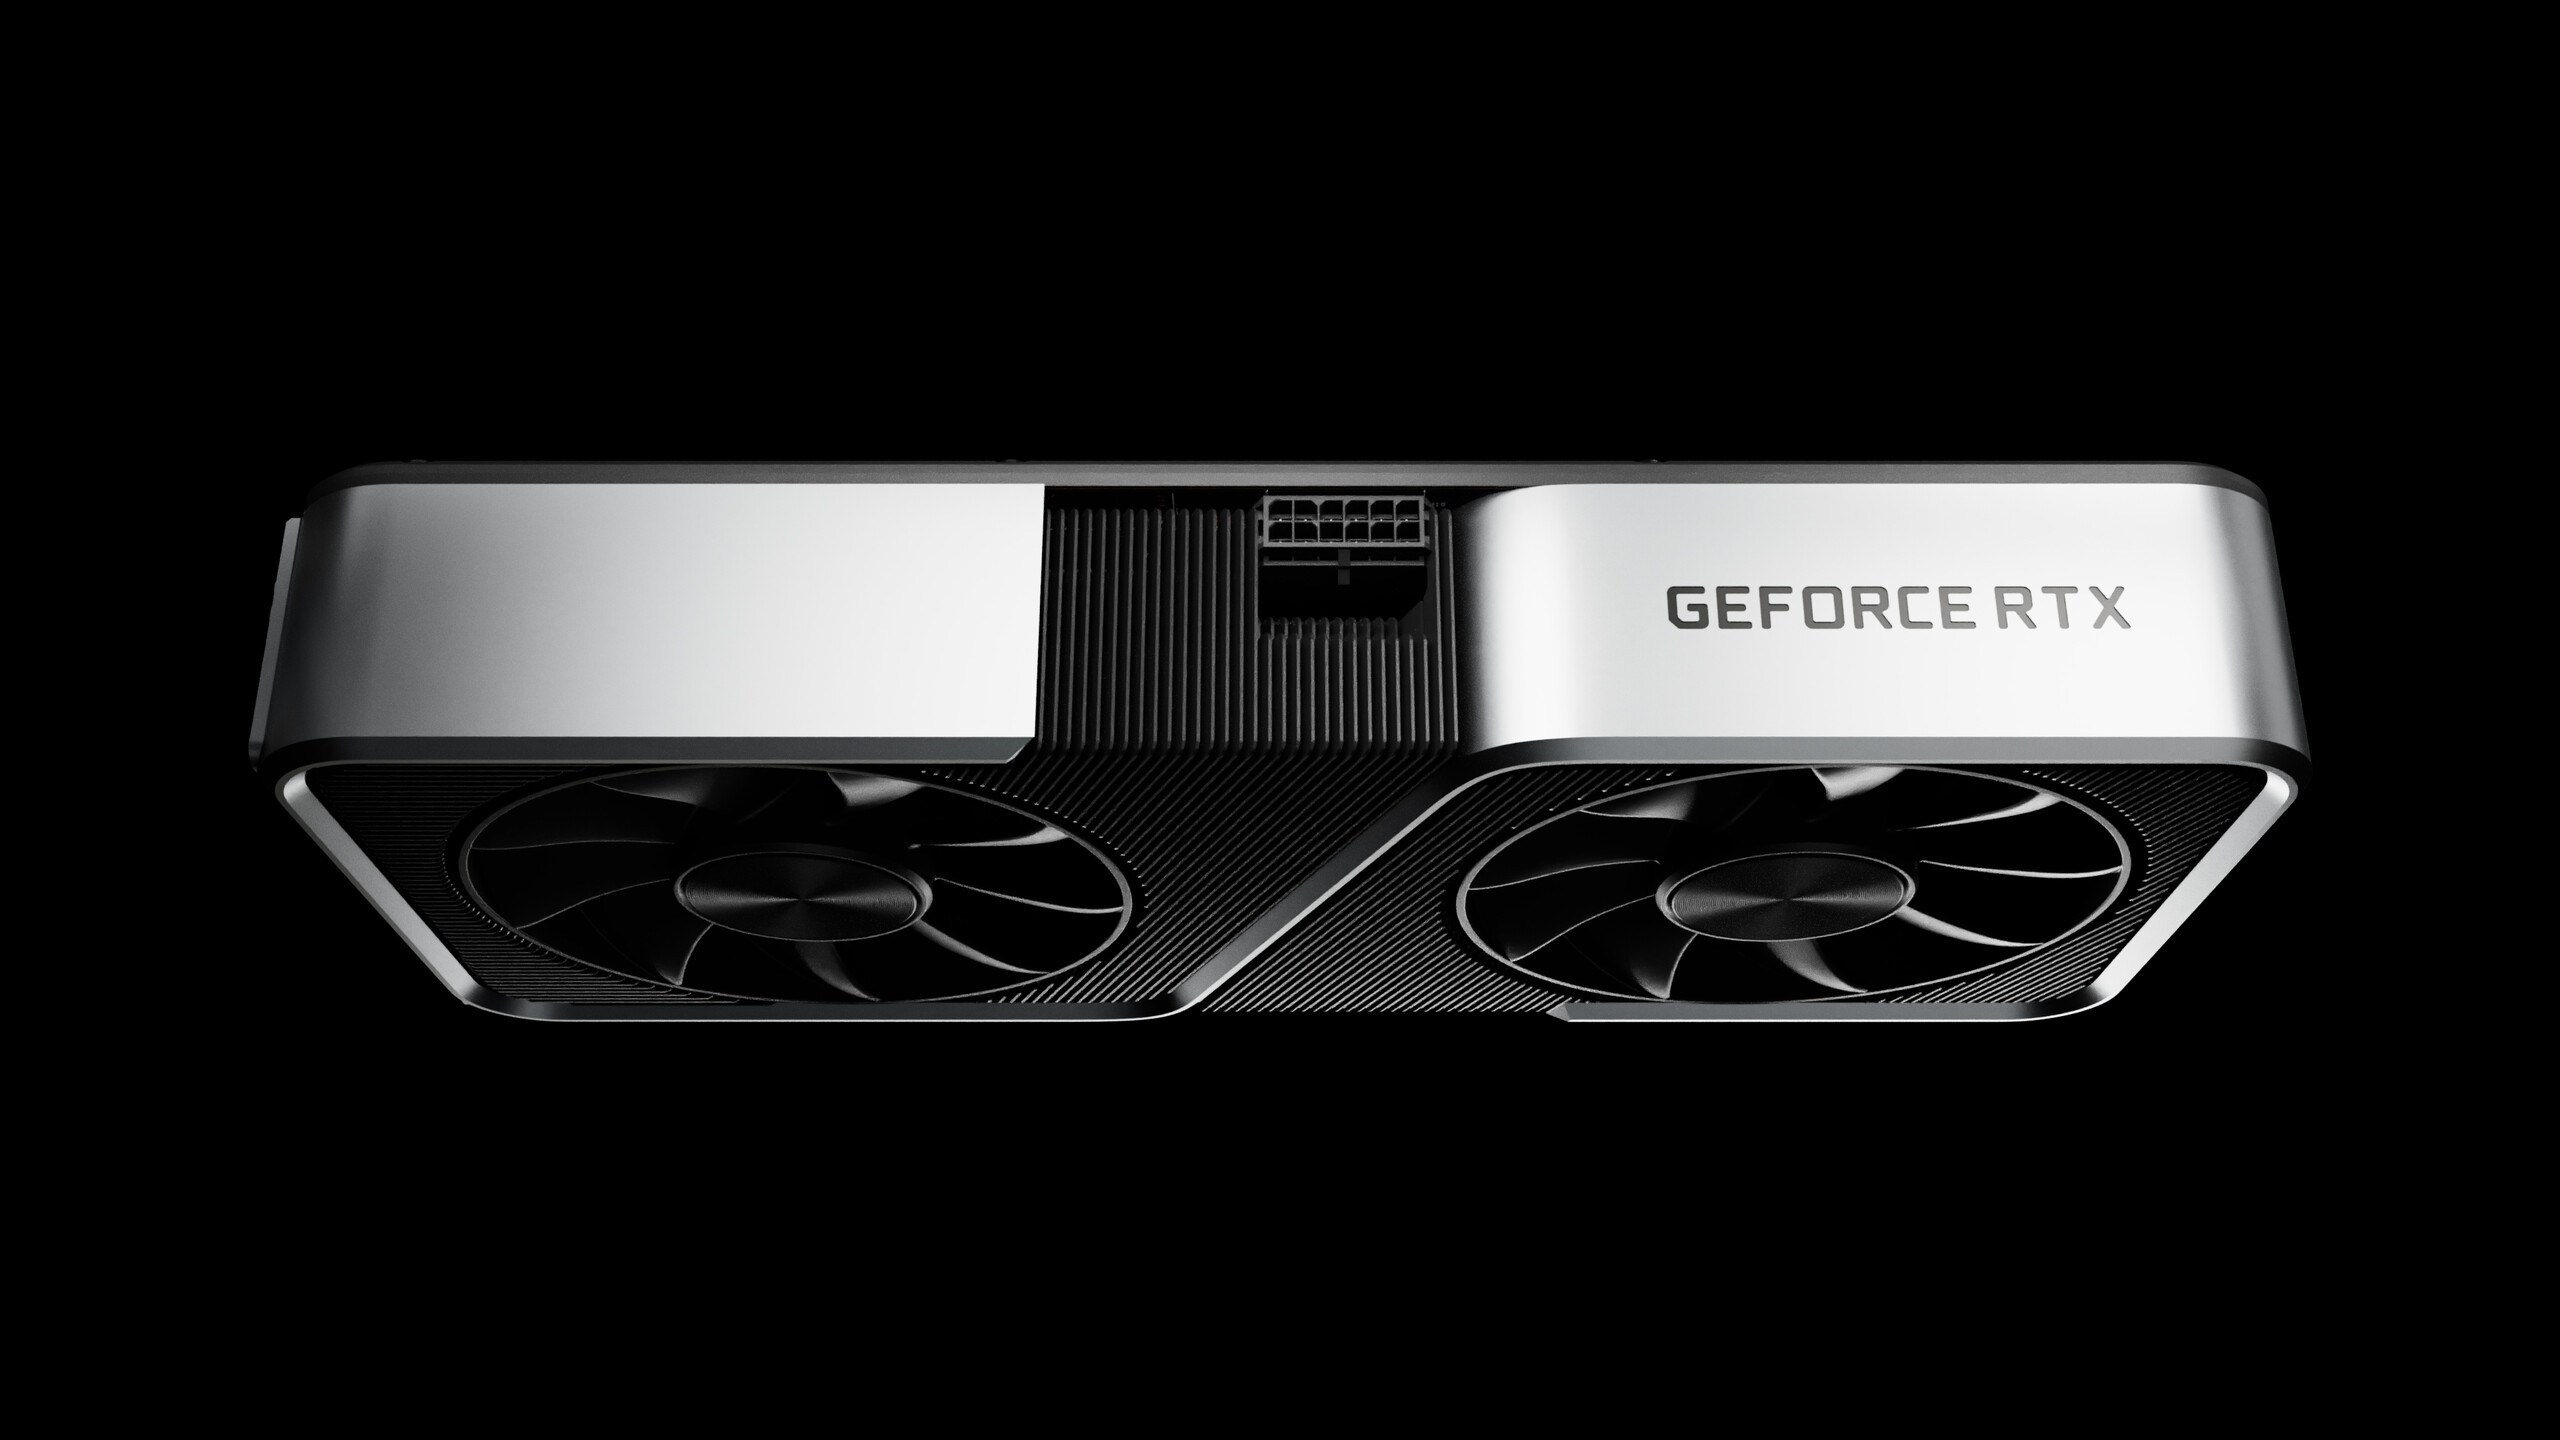 job Lager fusion The entire GeForce RTX 3000 Super series' specs have been leaked online -  NotebookCheck.net News